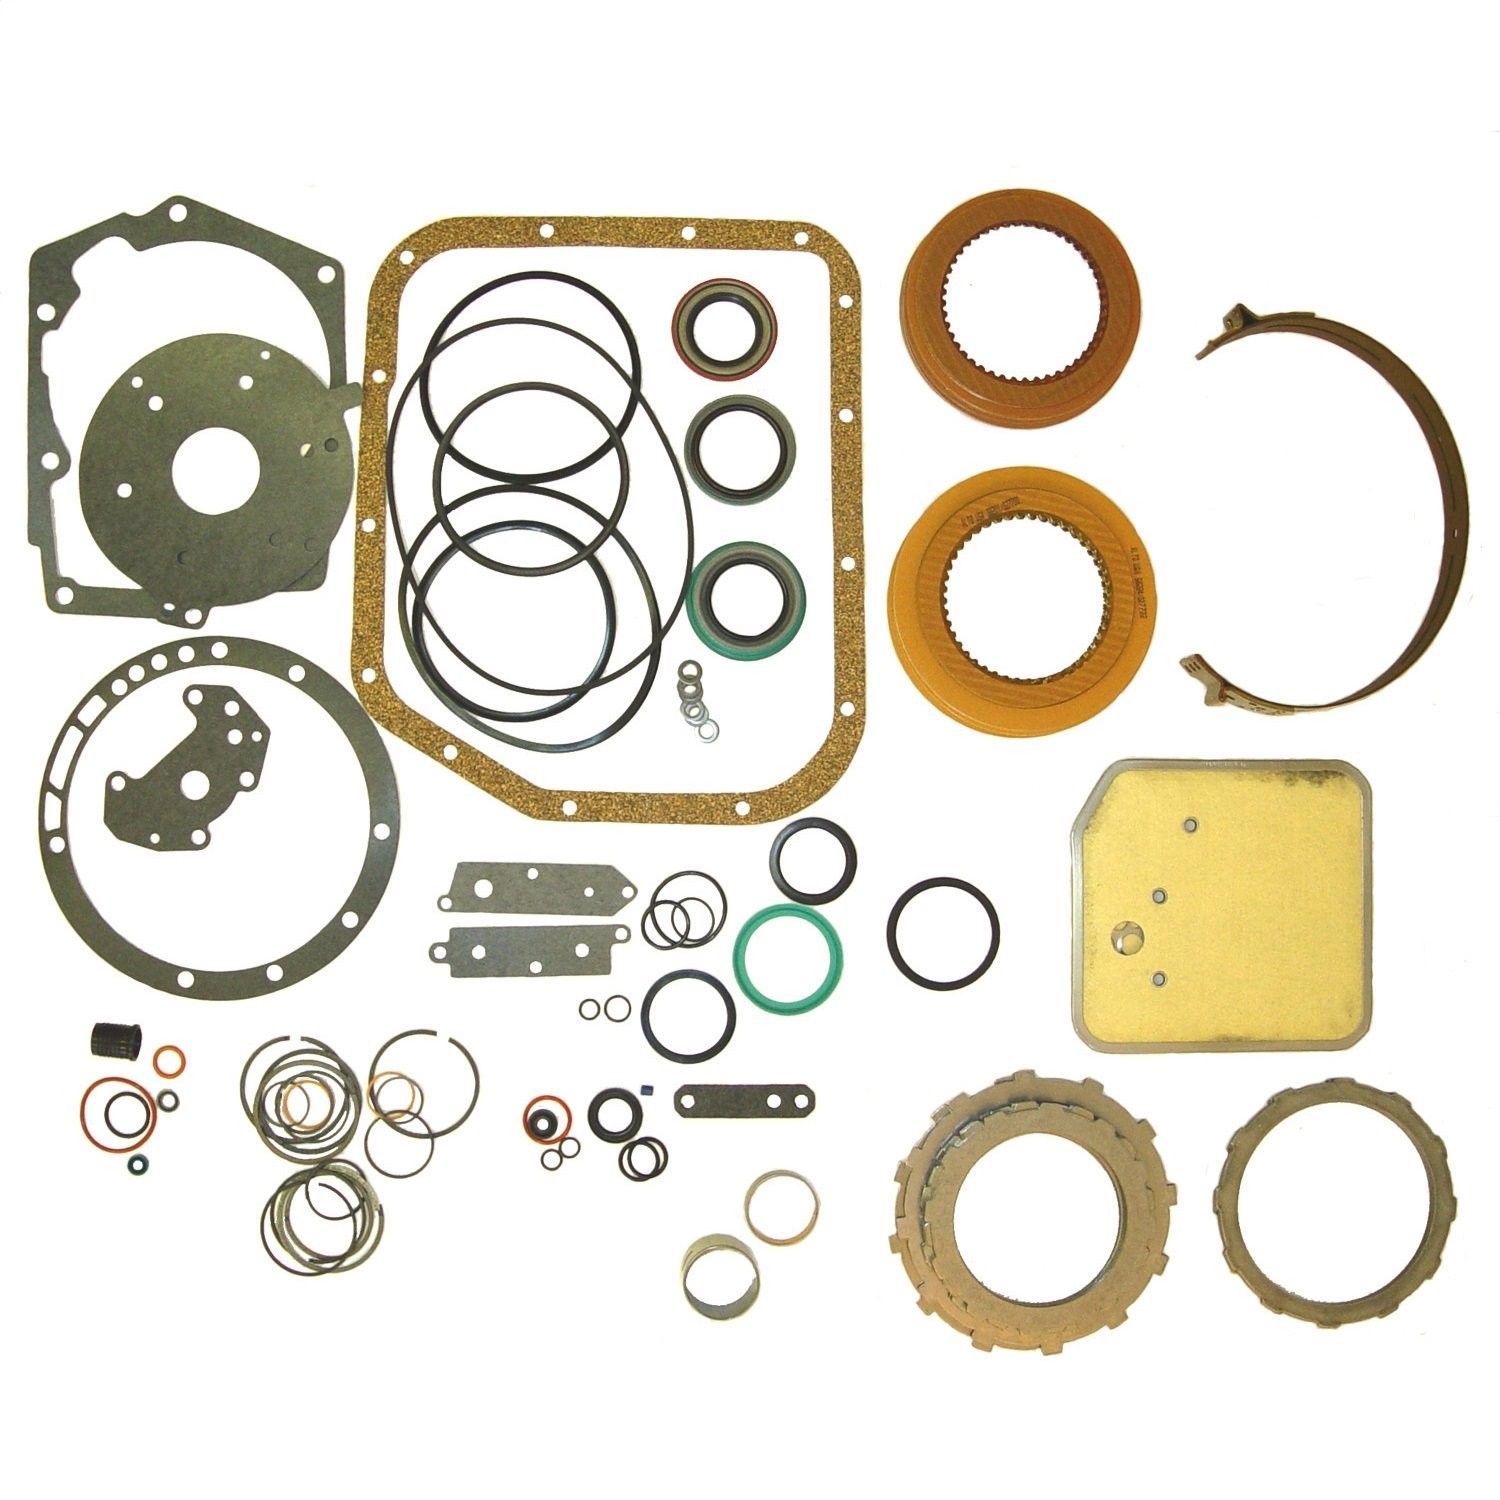 This automatic transmission rebuild kit fits 93-98 Jeep Grand Cherokee ZJ and 99-04 Jeep Grand Chero